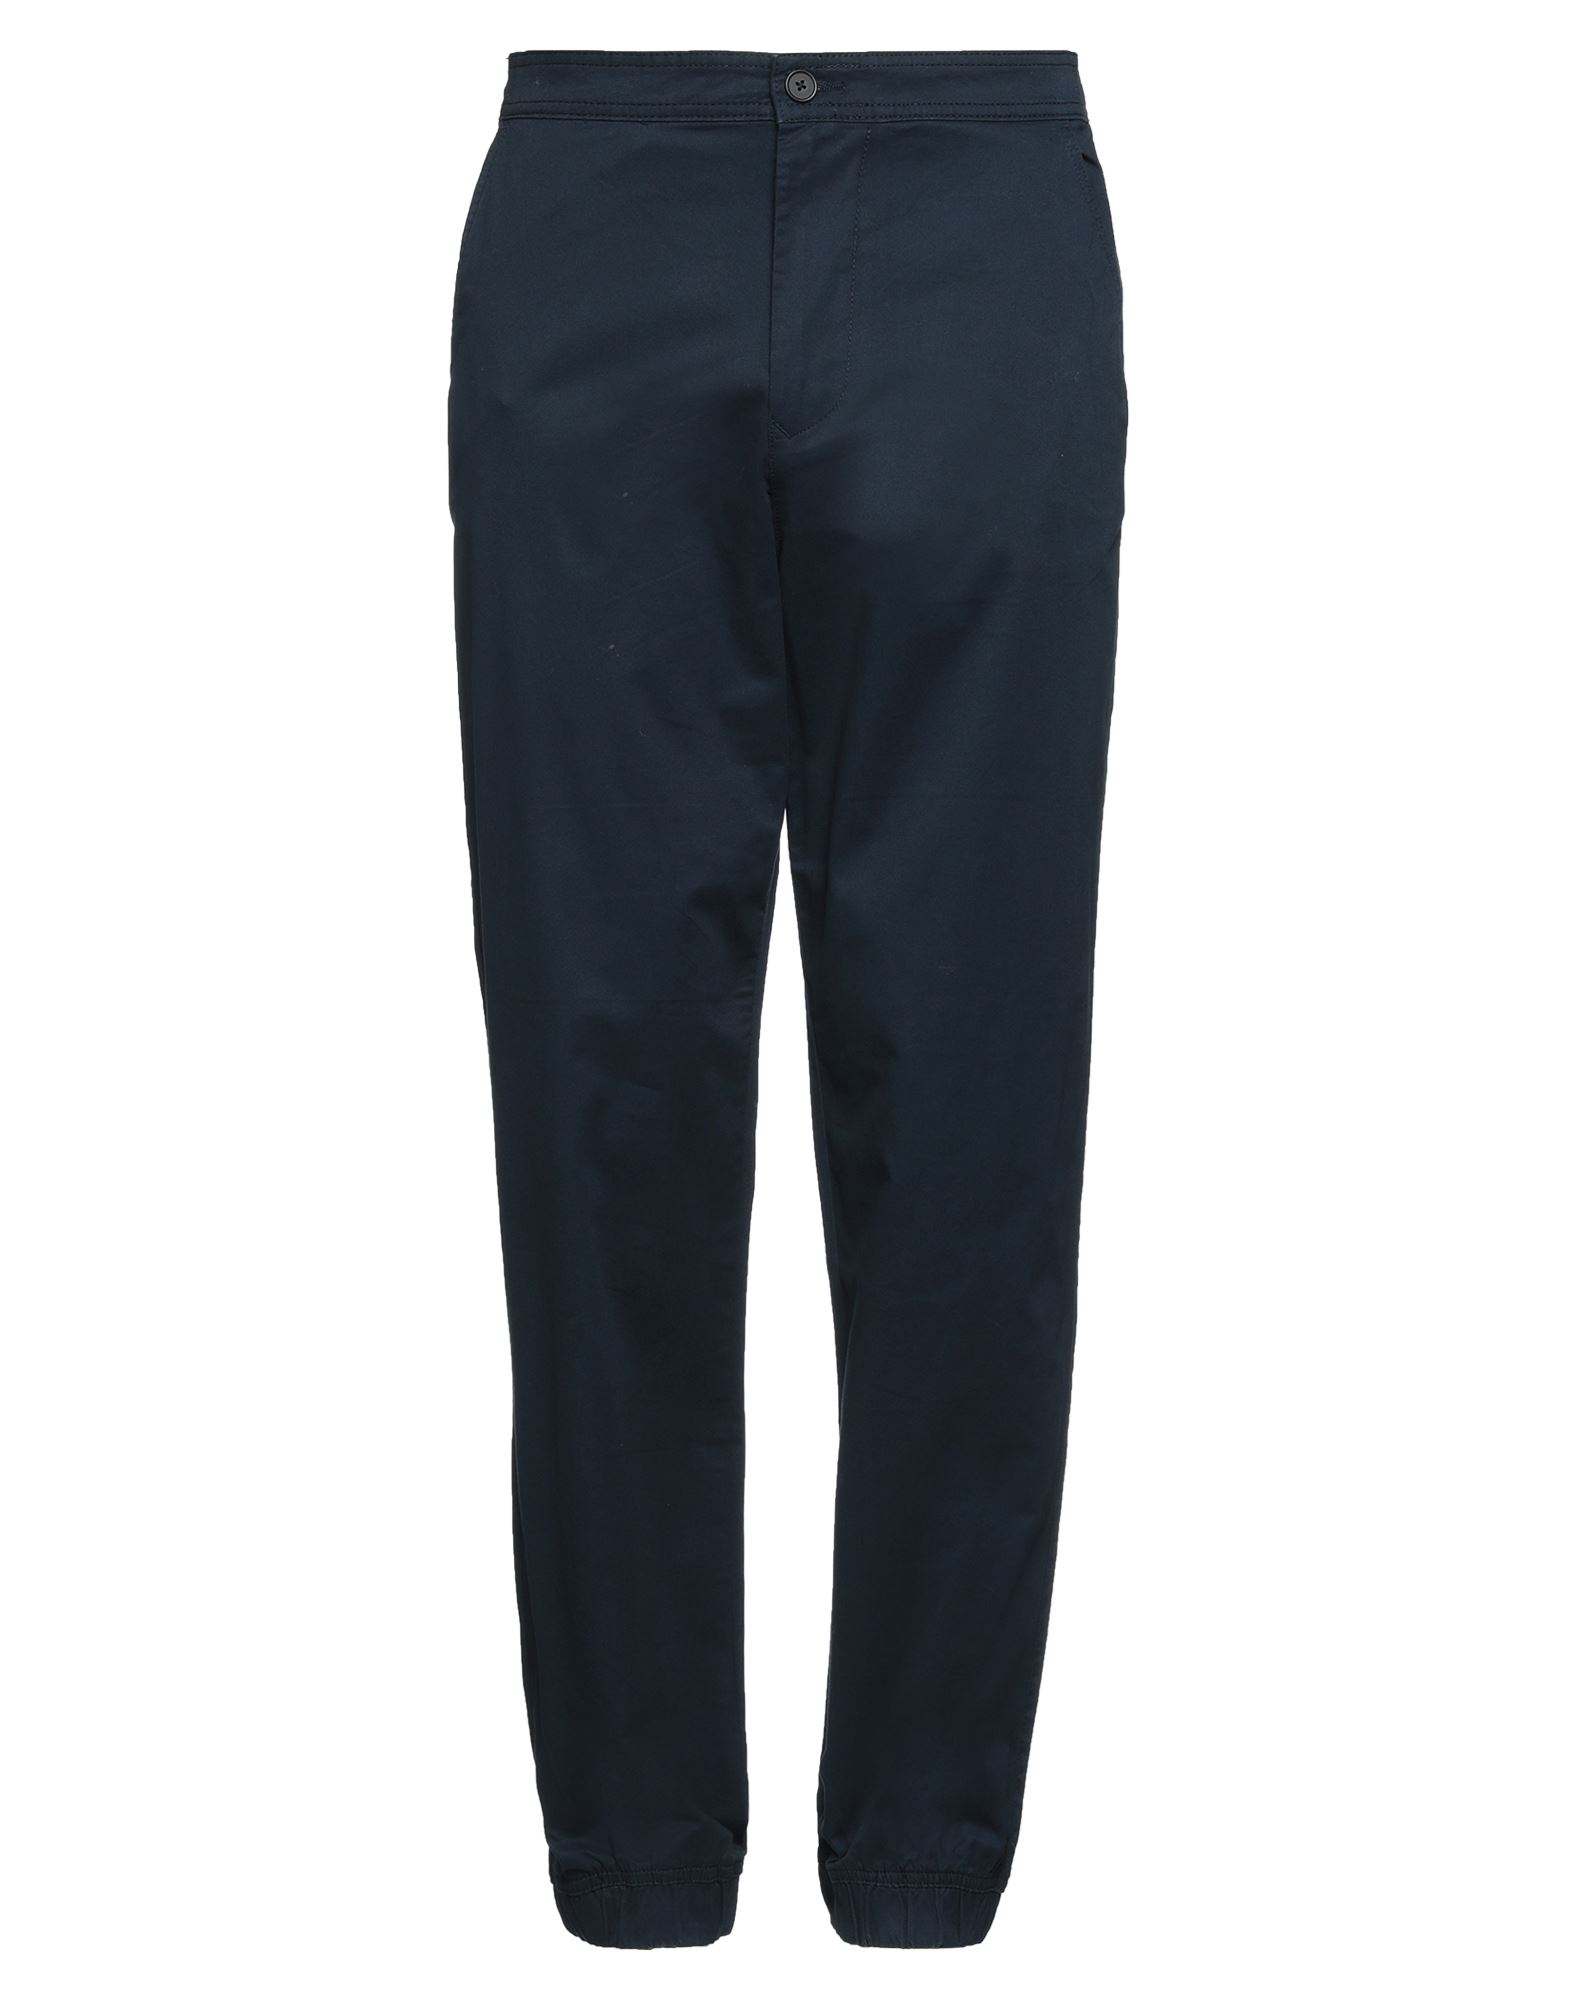 SELECTED HOMME SELECTED HOMME MAN PANTS MIDNIGHT BLUE SIZE 33W-34L ORGANIC COTTON, COTTON, ELASTANE